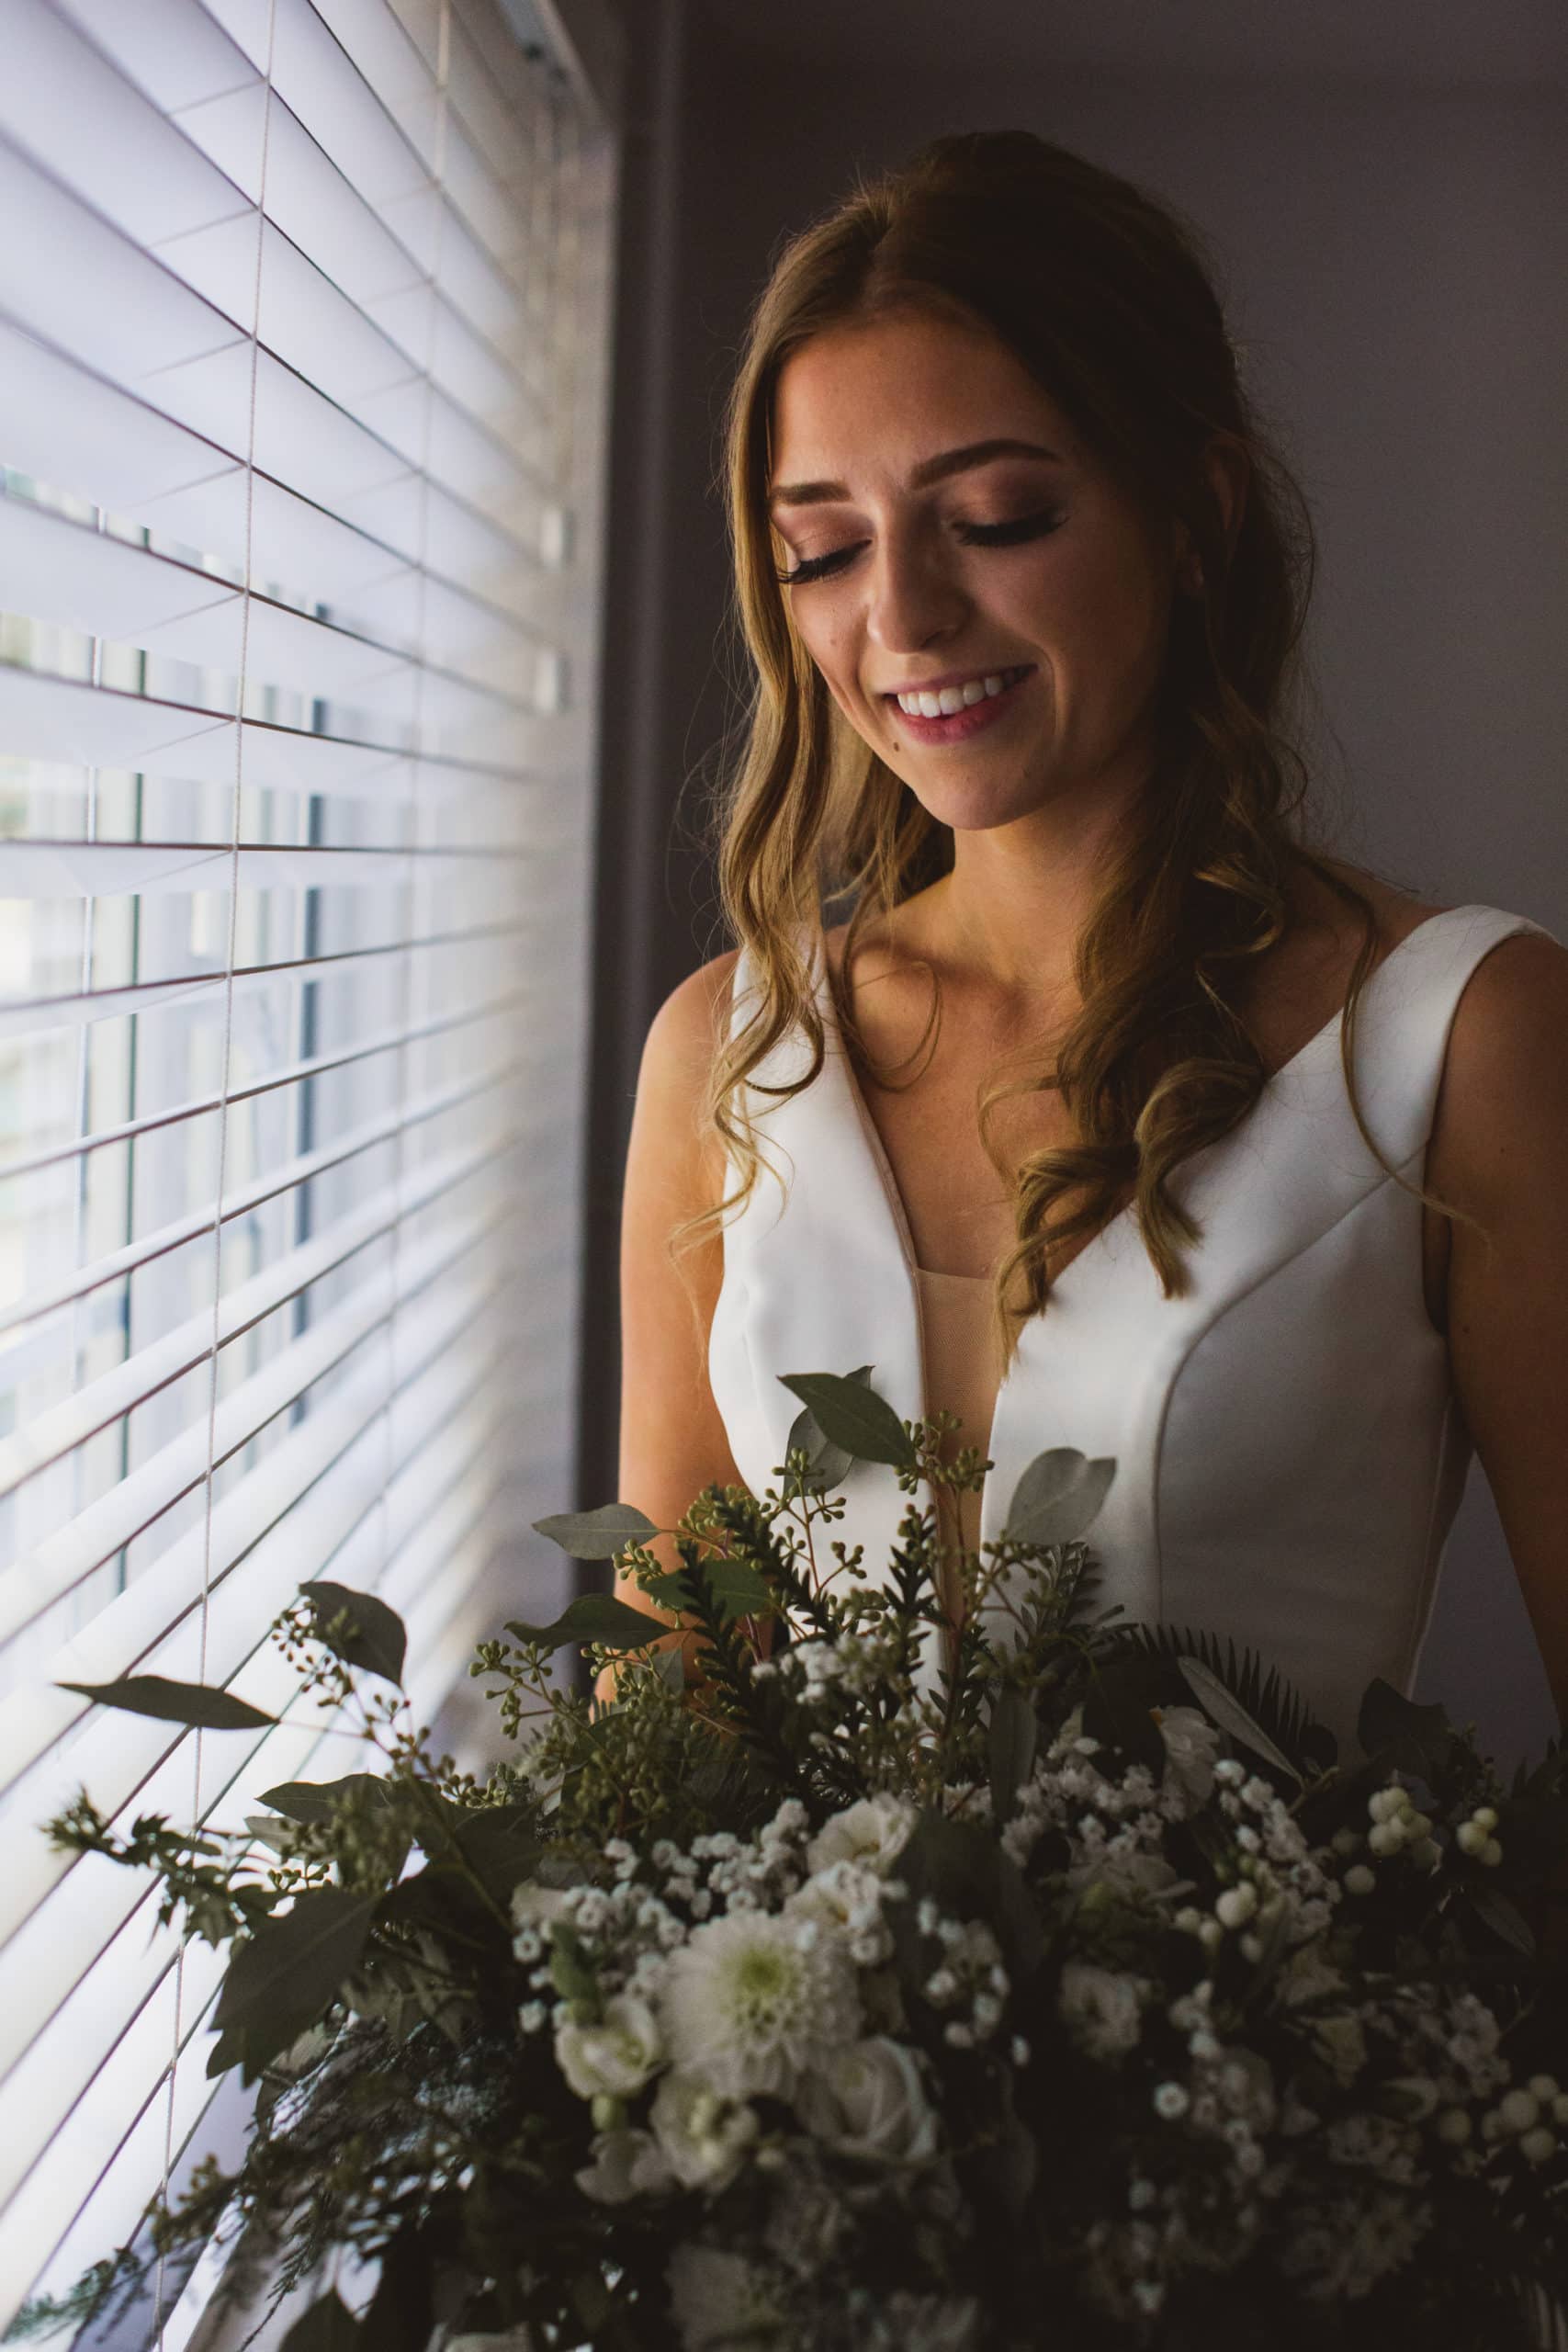 Bride with flowers